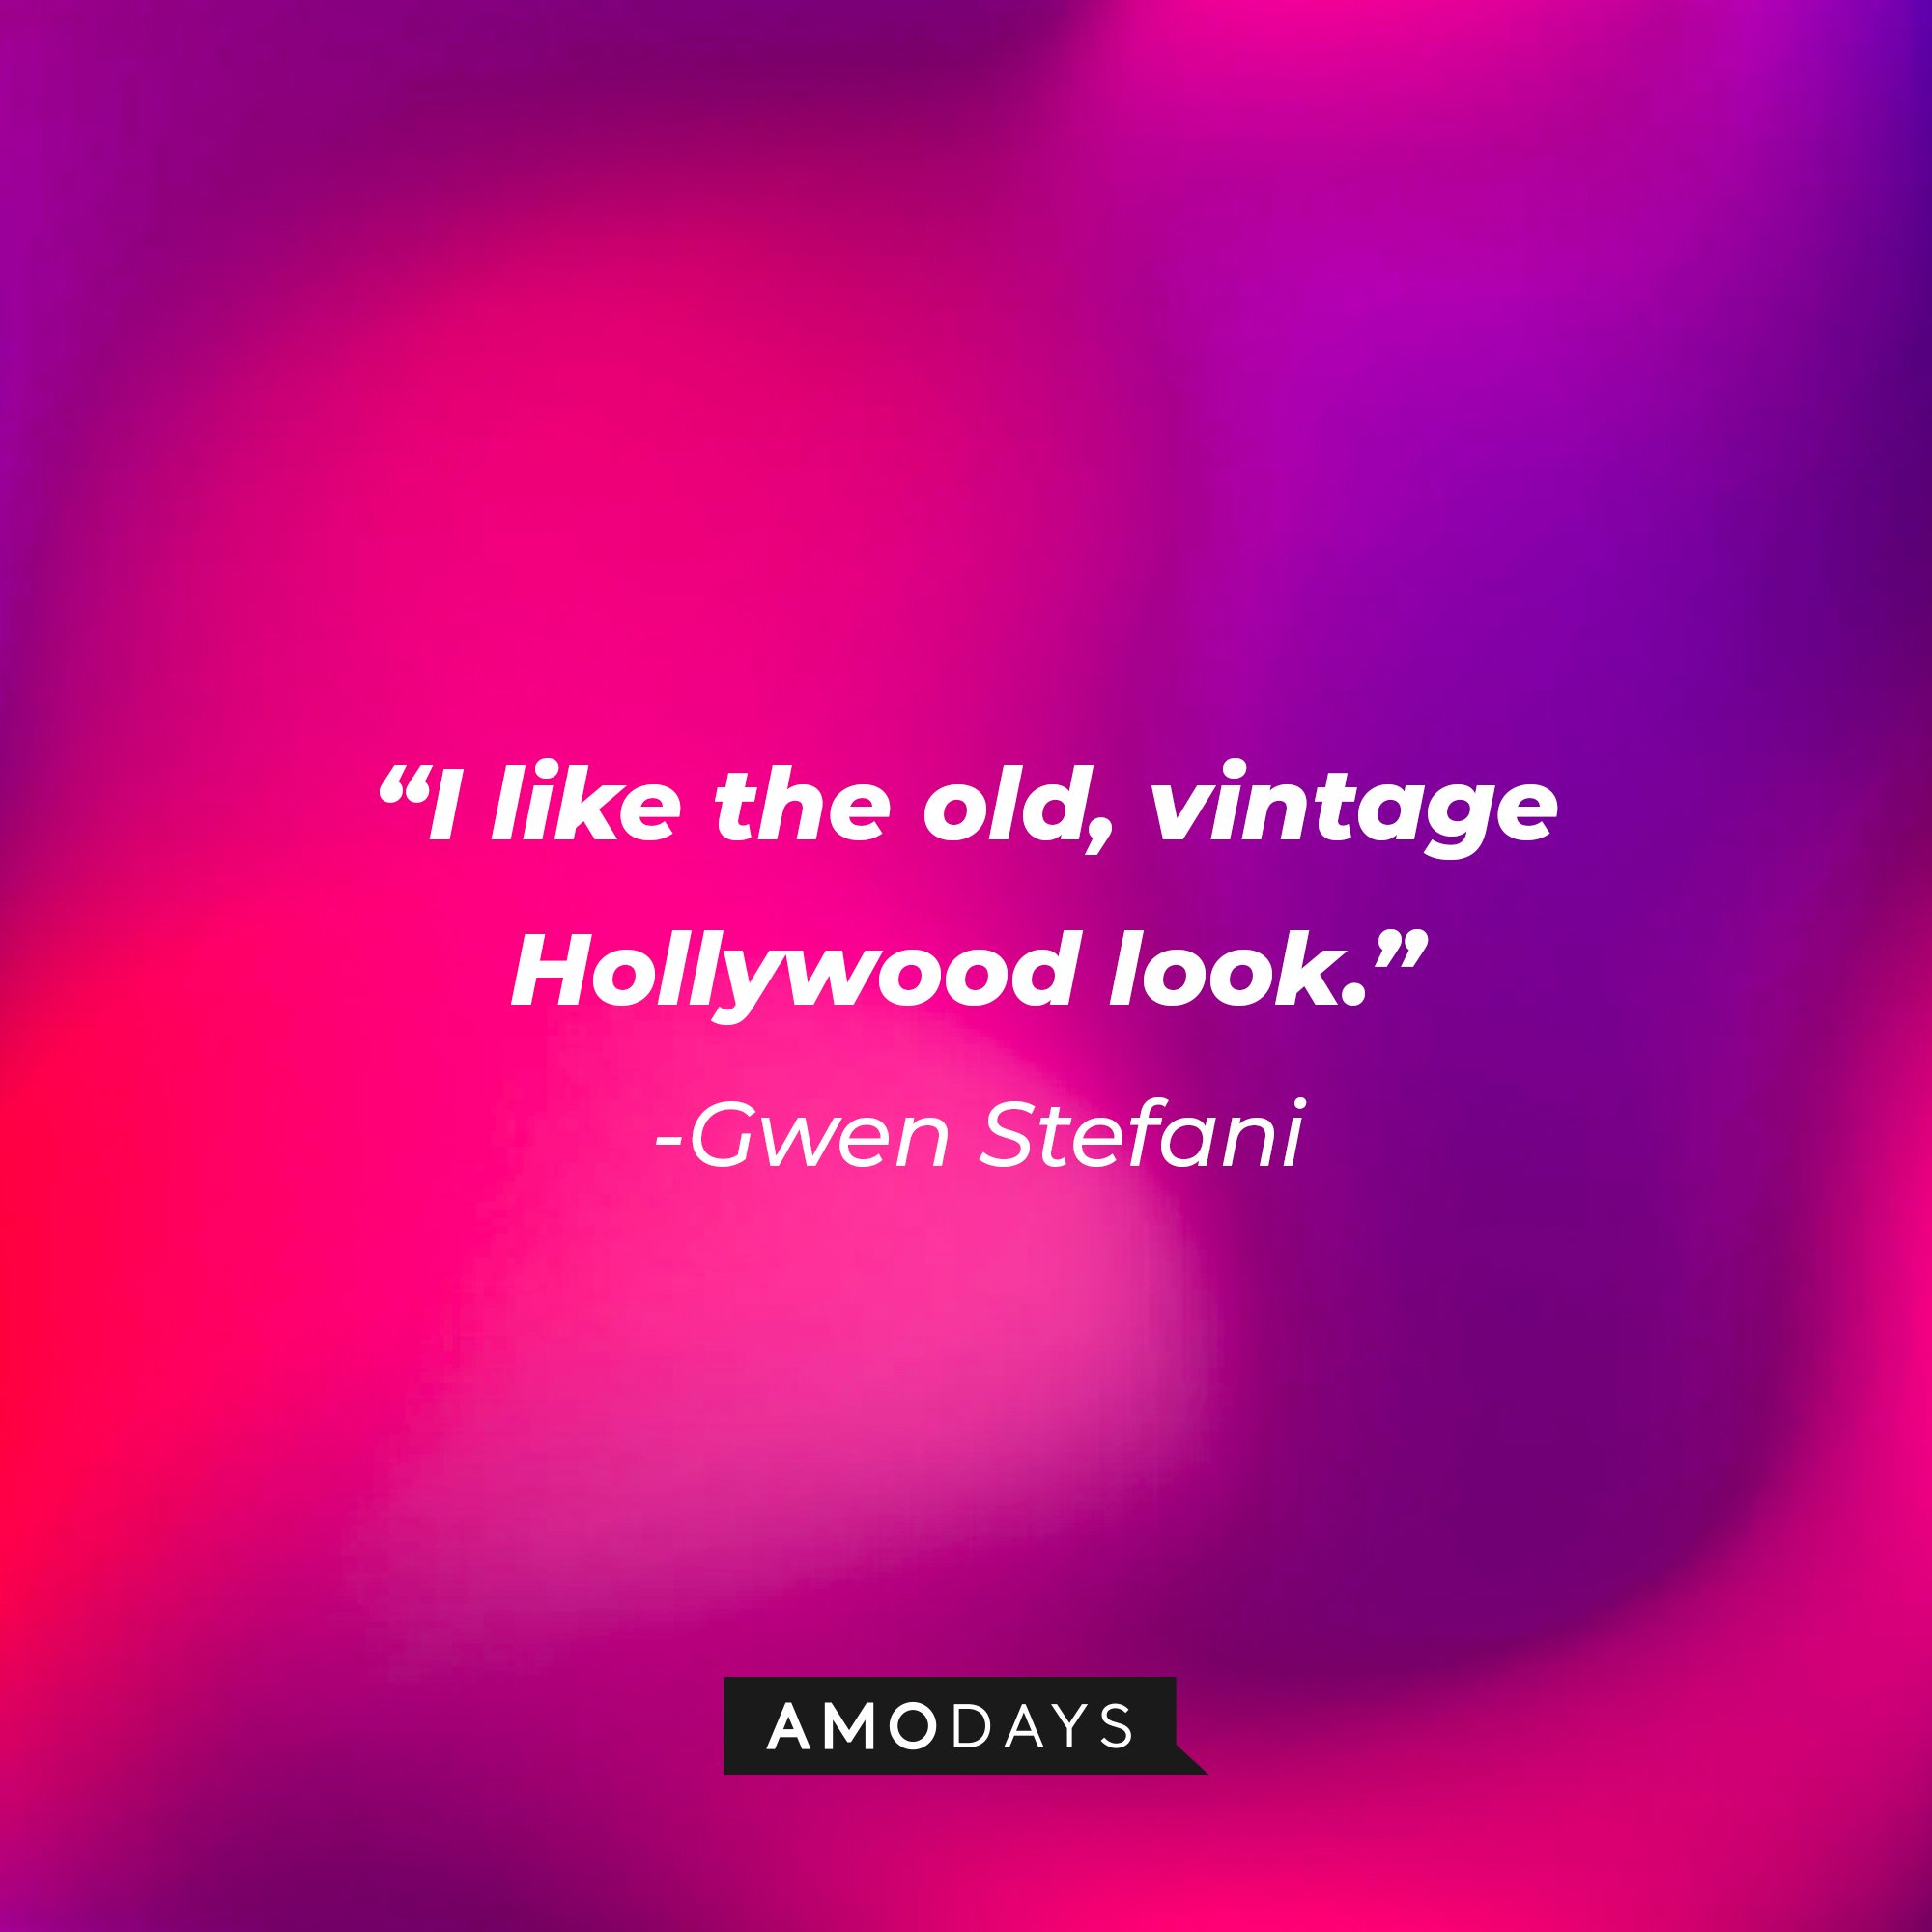 Gwen Stefani’s quote: "I like the old, vintage Hollywood look." | Image: AmoDays